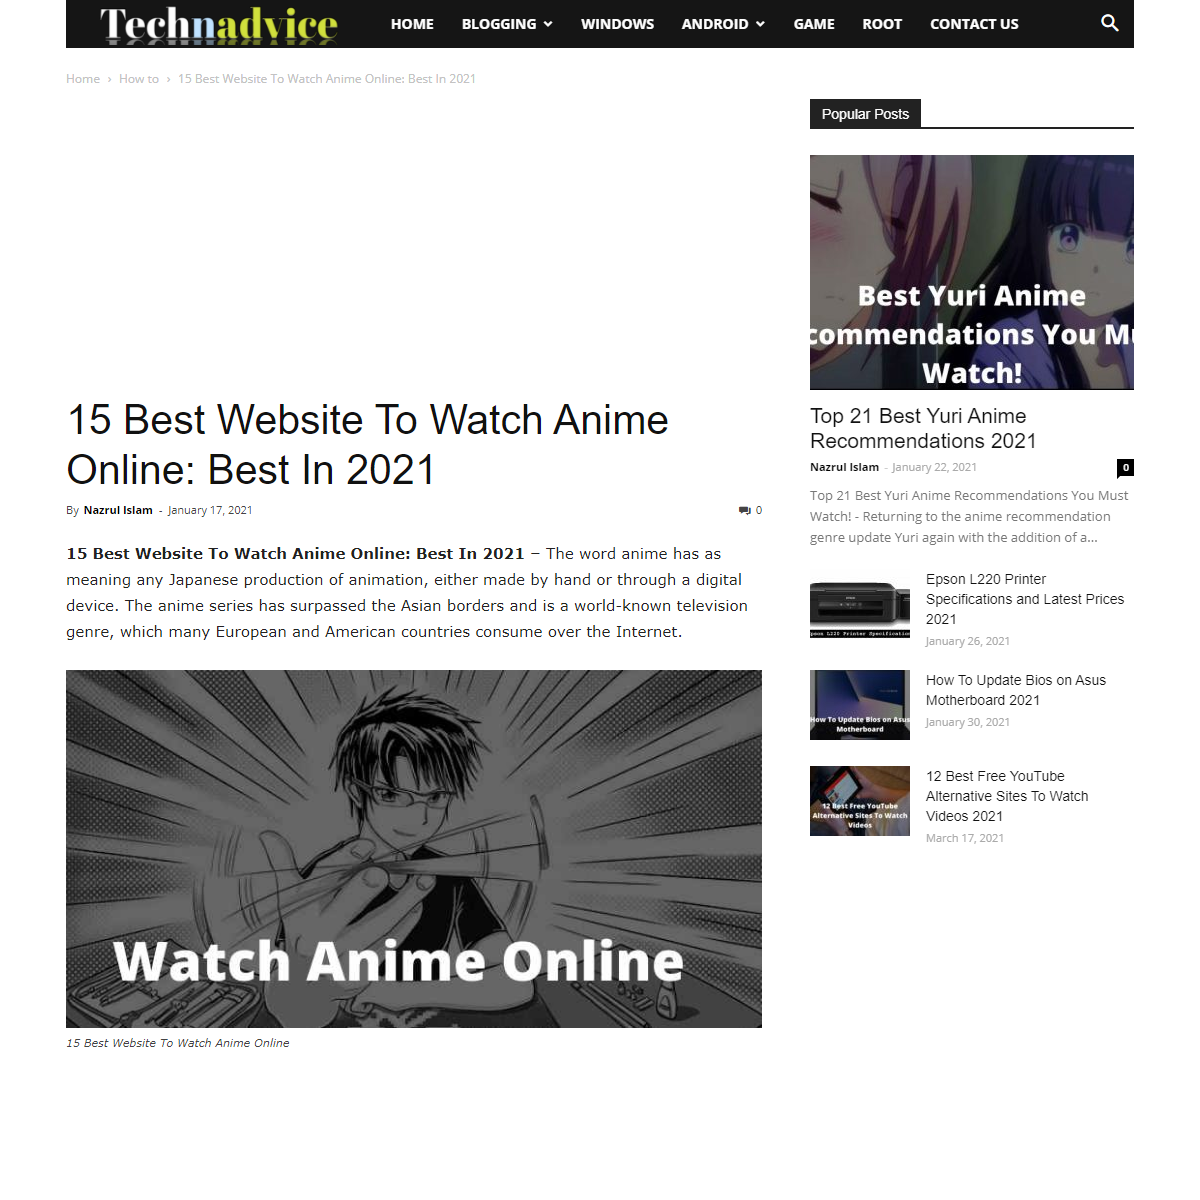 A complete backup of https://technadvice.com/watch-anime-online/